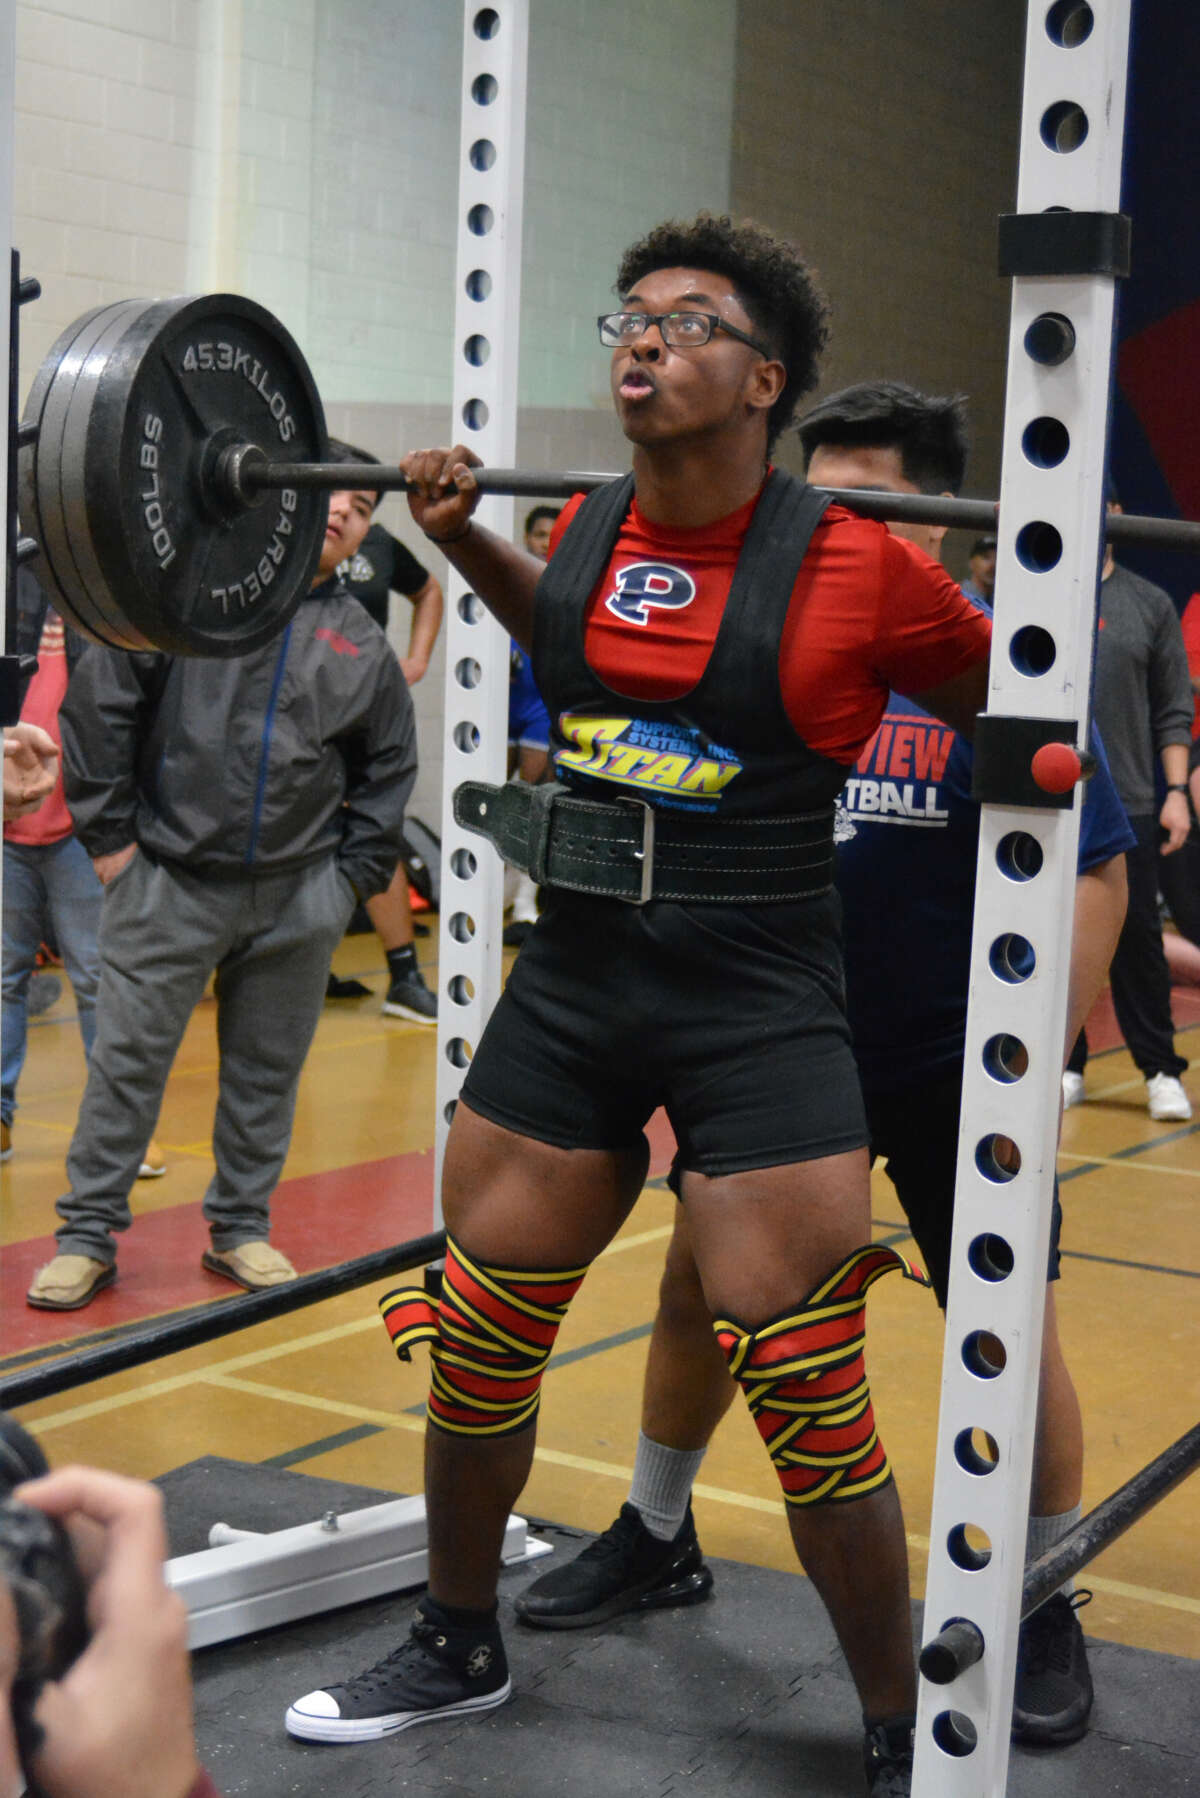 Plainview Bulldog D’Shae Casias prepares to complete his squat during the Plainview Invitational on Saturday at Coronado Middle School in Plainview. Casias placed first at 220.